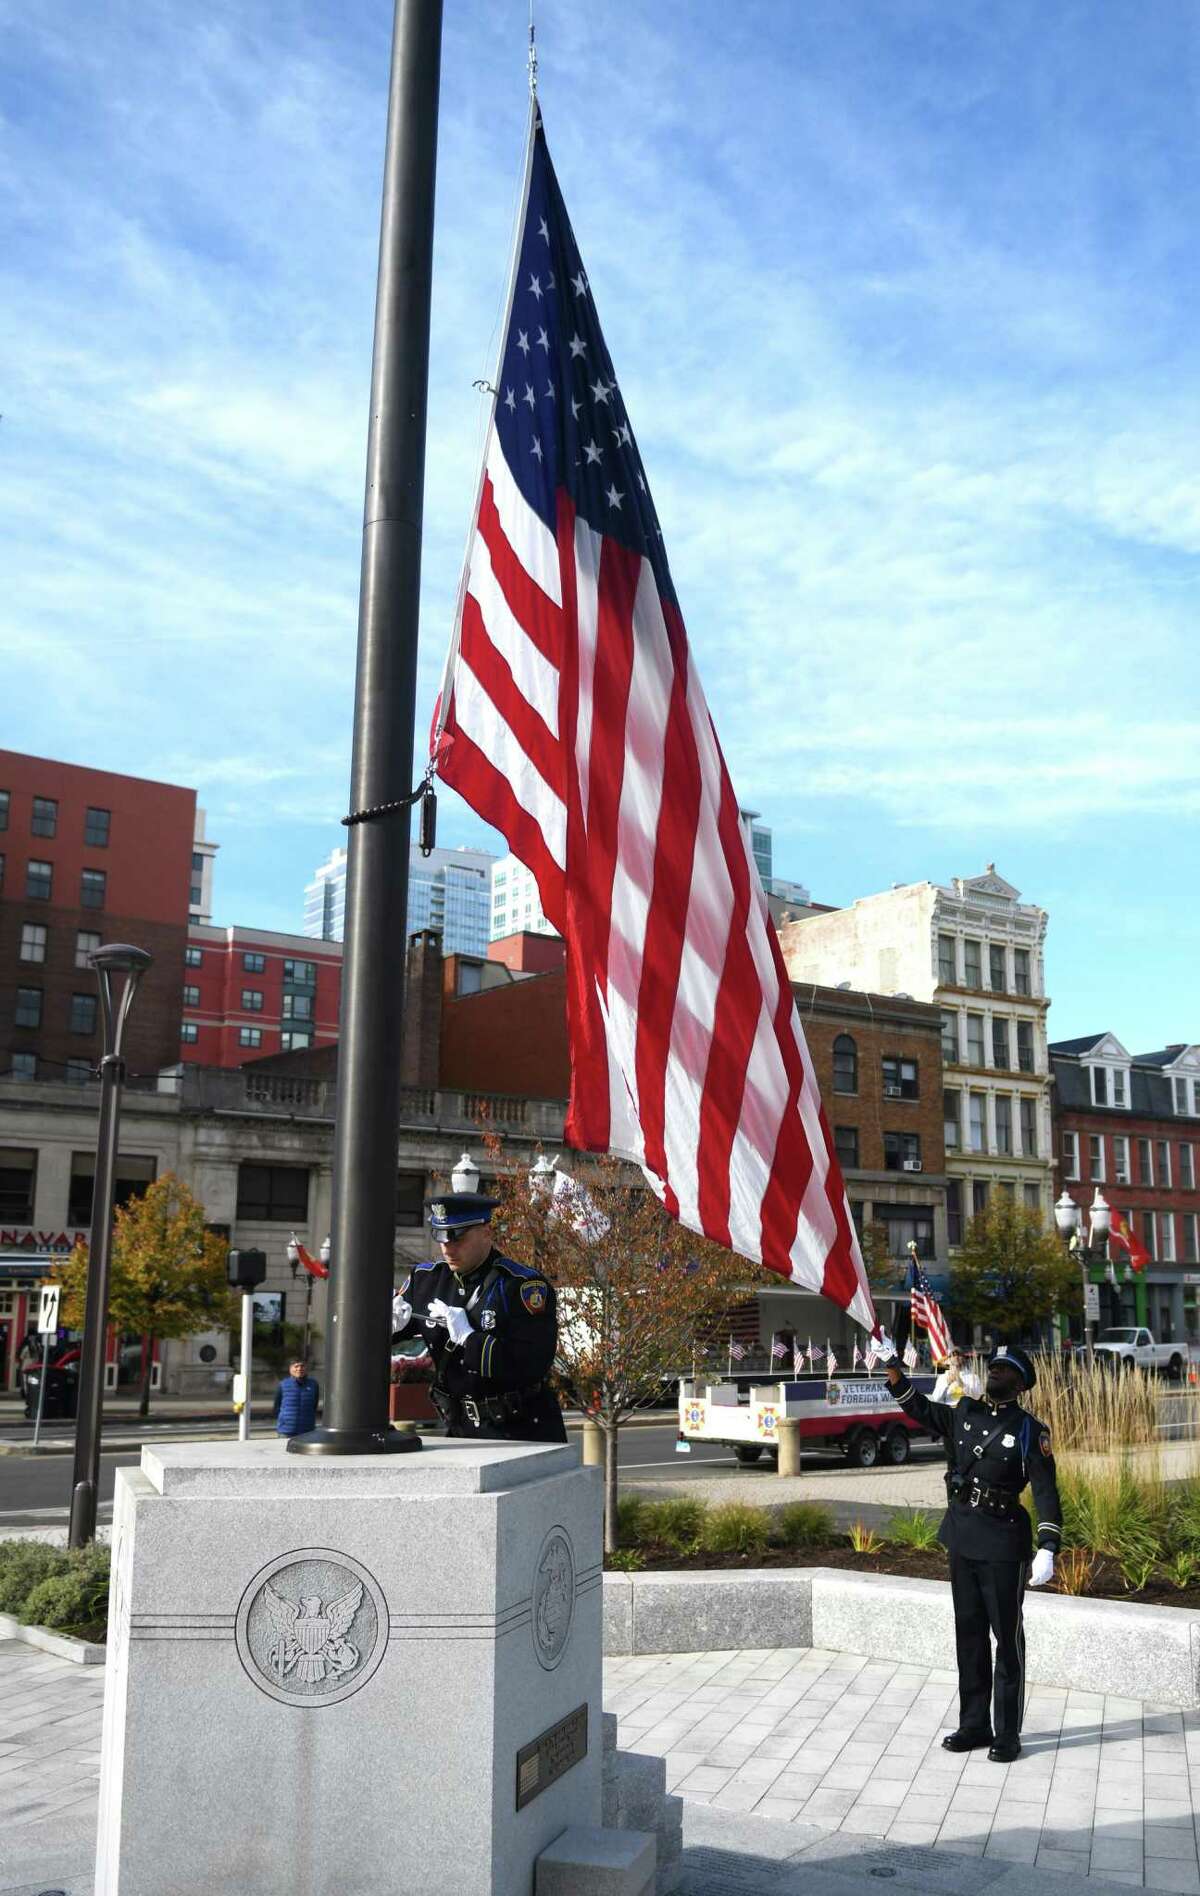 Stamford police Officer Nicholas Kuhn, photo left, raises the flag at the Veterans Day Ceremony at Veterans Memorial Park in Stamford on Sunday. Top right, U.S. Army Sgt. Hubert Delany serves as host of the ceremony while Stamford firefighter Rich LoRusso, above, salutes the flag. Following the parade, the ceremony honored the grand marshal, U.S. Navy Petty Officer Third Class James L. Dudley Jr. (Ret.), and Stamford’s Purple Heart recipients. Mayor David Martin announced Stamford as a Purple Heart City and added it to the Purple Heart Trail. The city of Stamford, Patriotic and Special Events Commission, Veterans Park Partnership, and local veterans’ groups partnered to host the parade and ceremony.